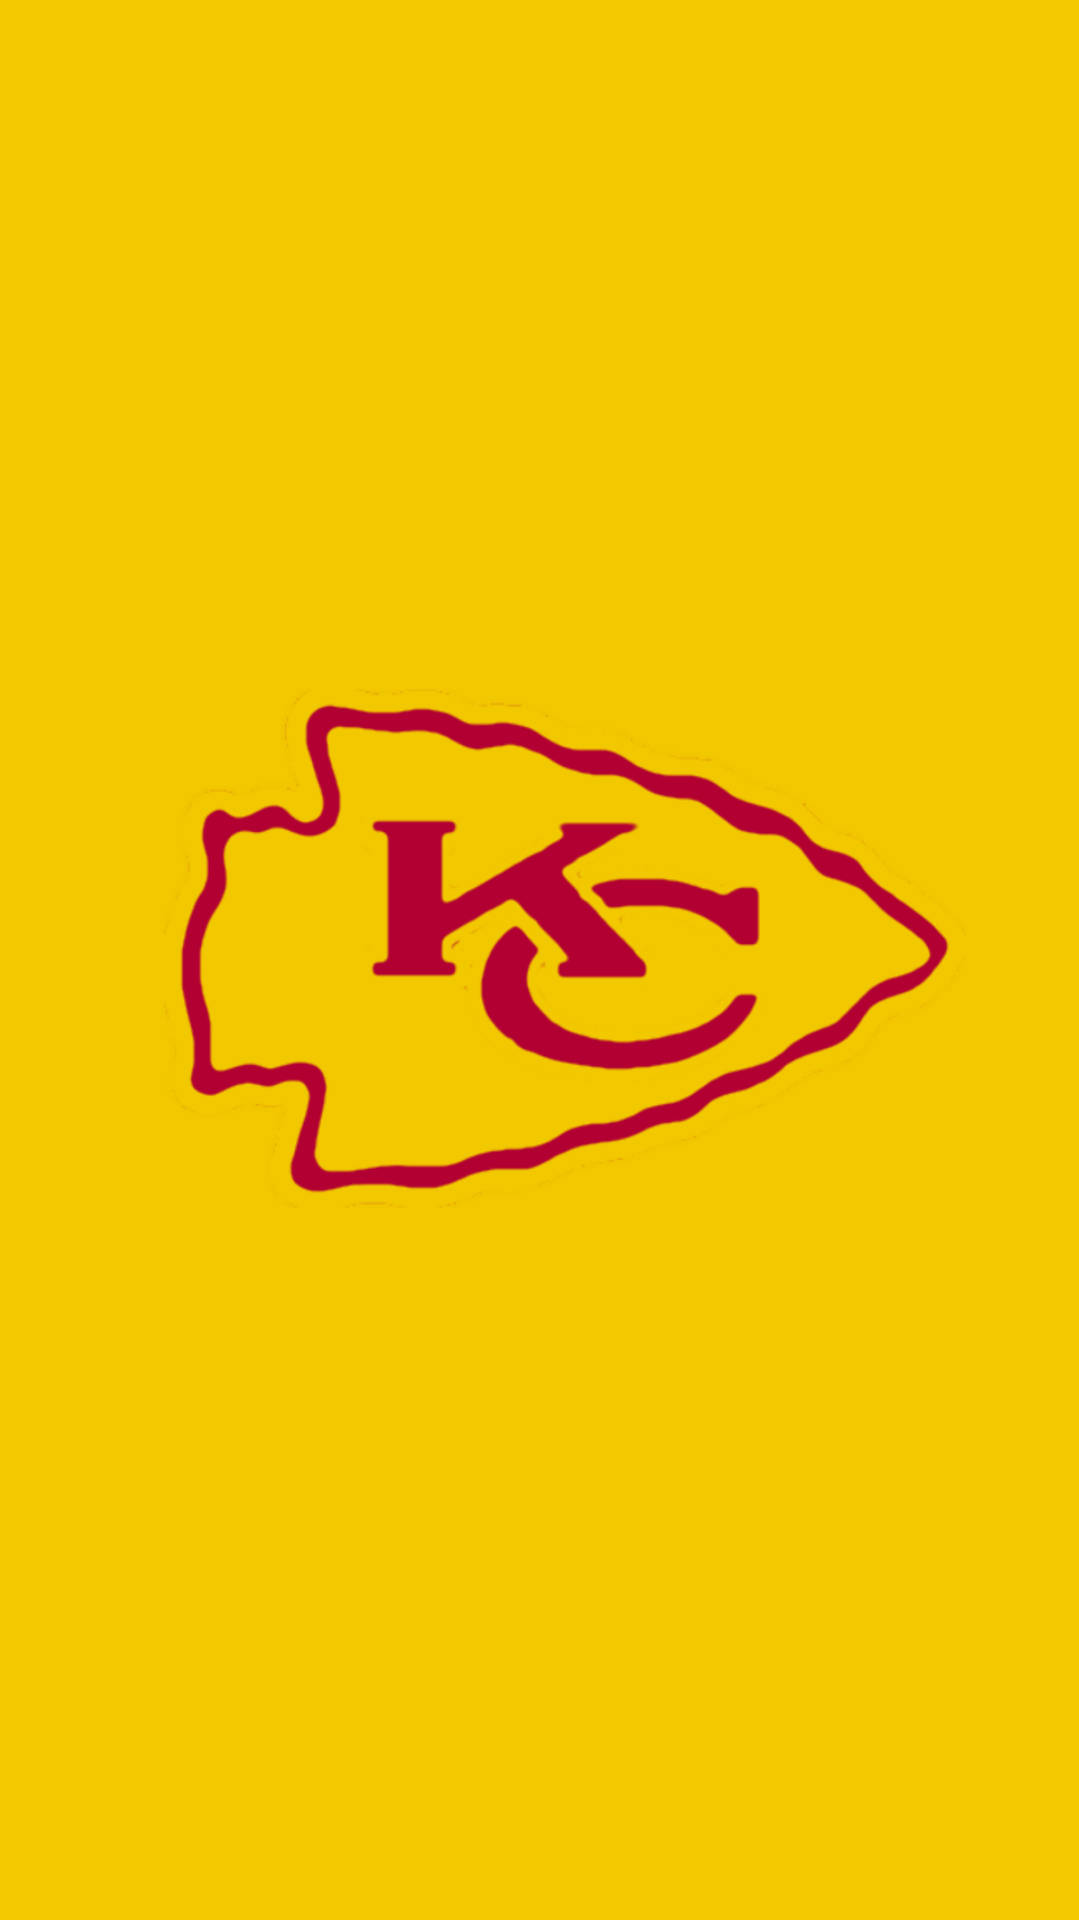 Yellow And Red Chiefs Logo Phone Wallpaper